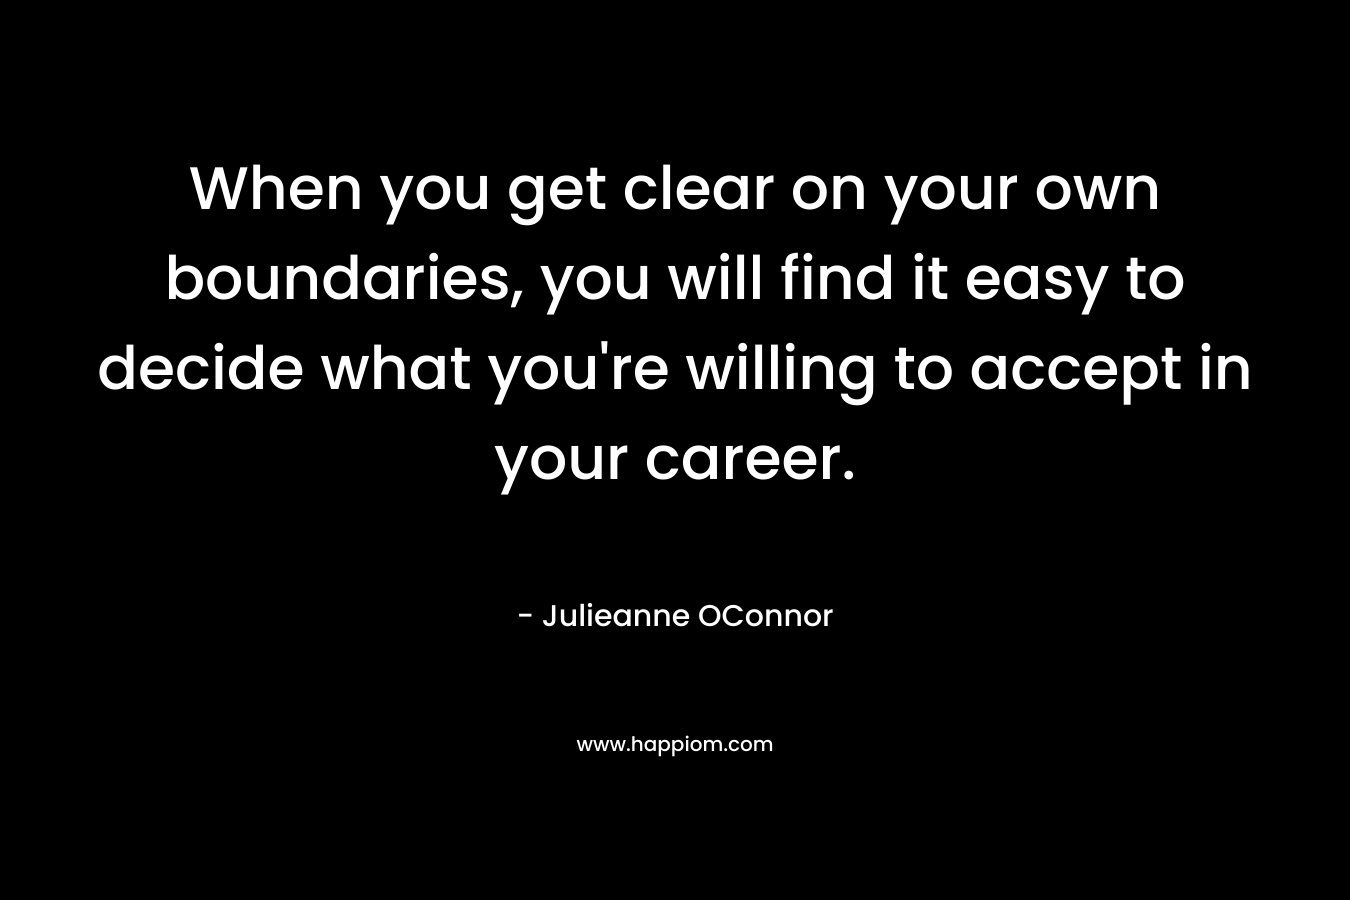 When you get clear on your own boundaries, you will find it easy to decide what you're willing to accept in your career.